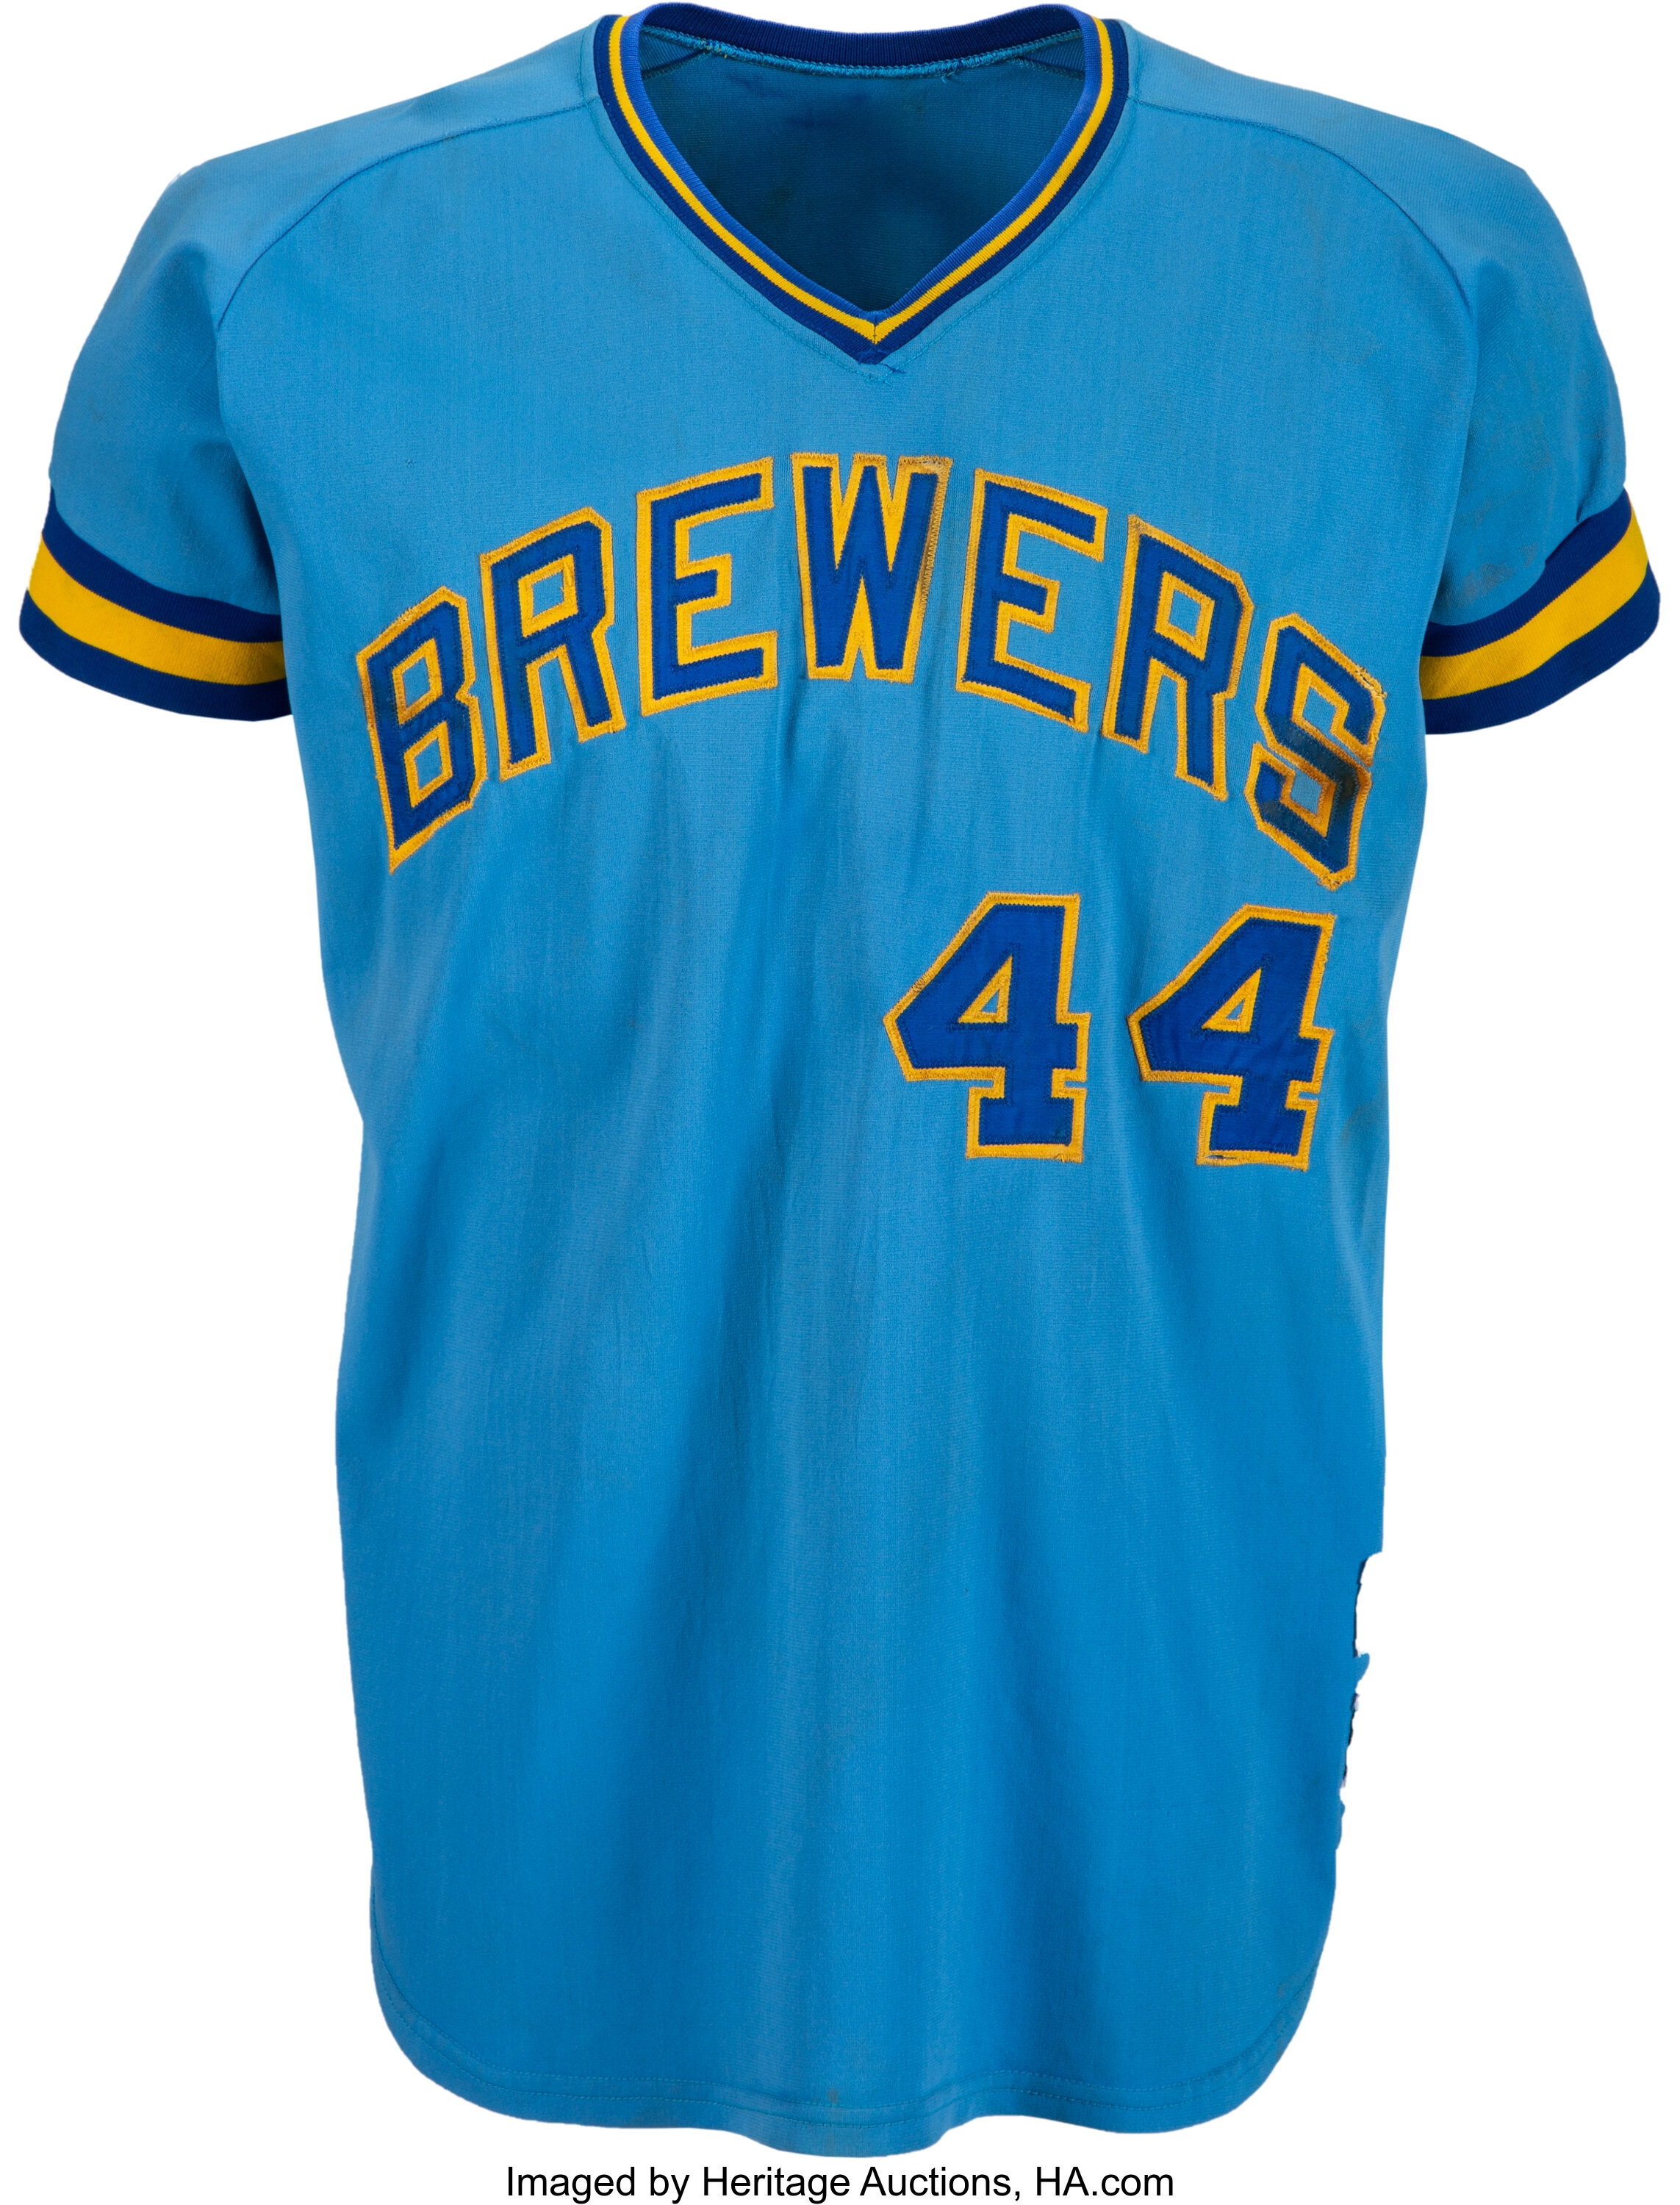 1976 Milwaukee Brewers Game Worn Complete Uniforms Lot of 6